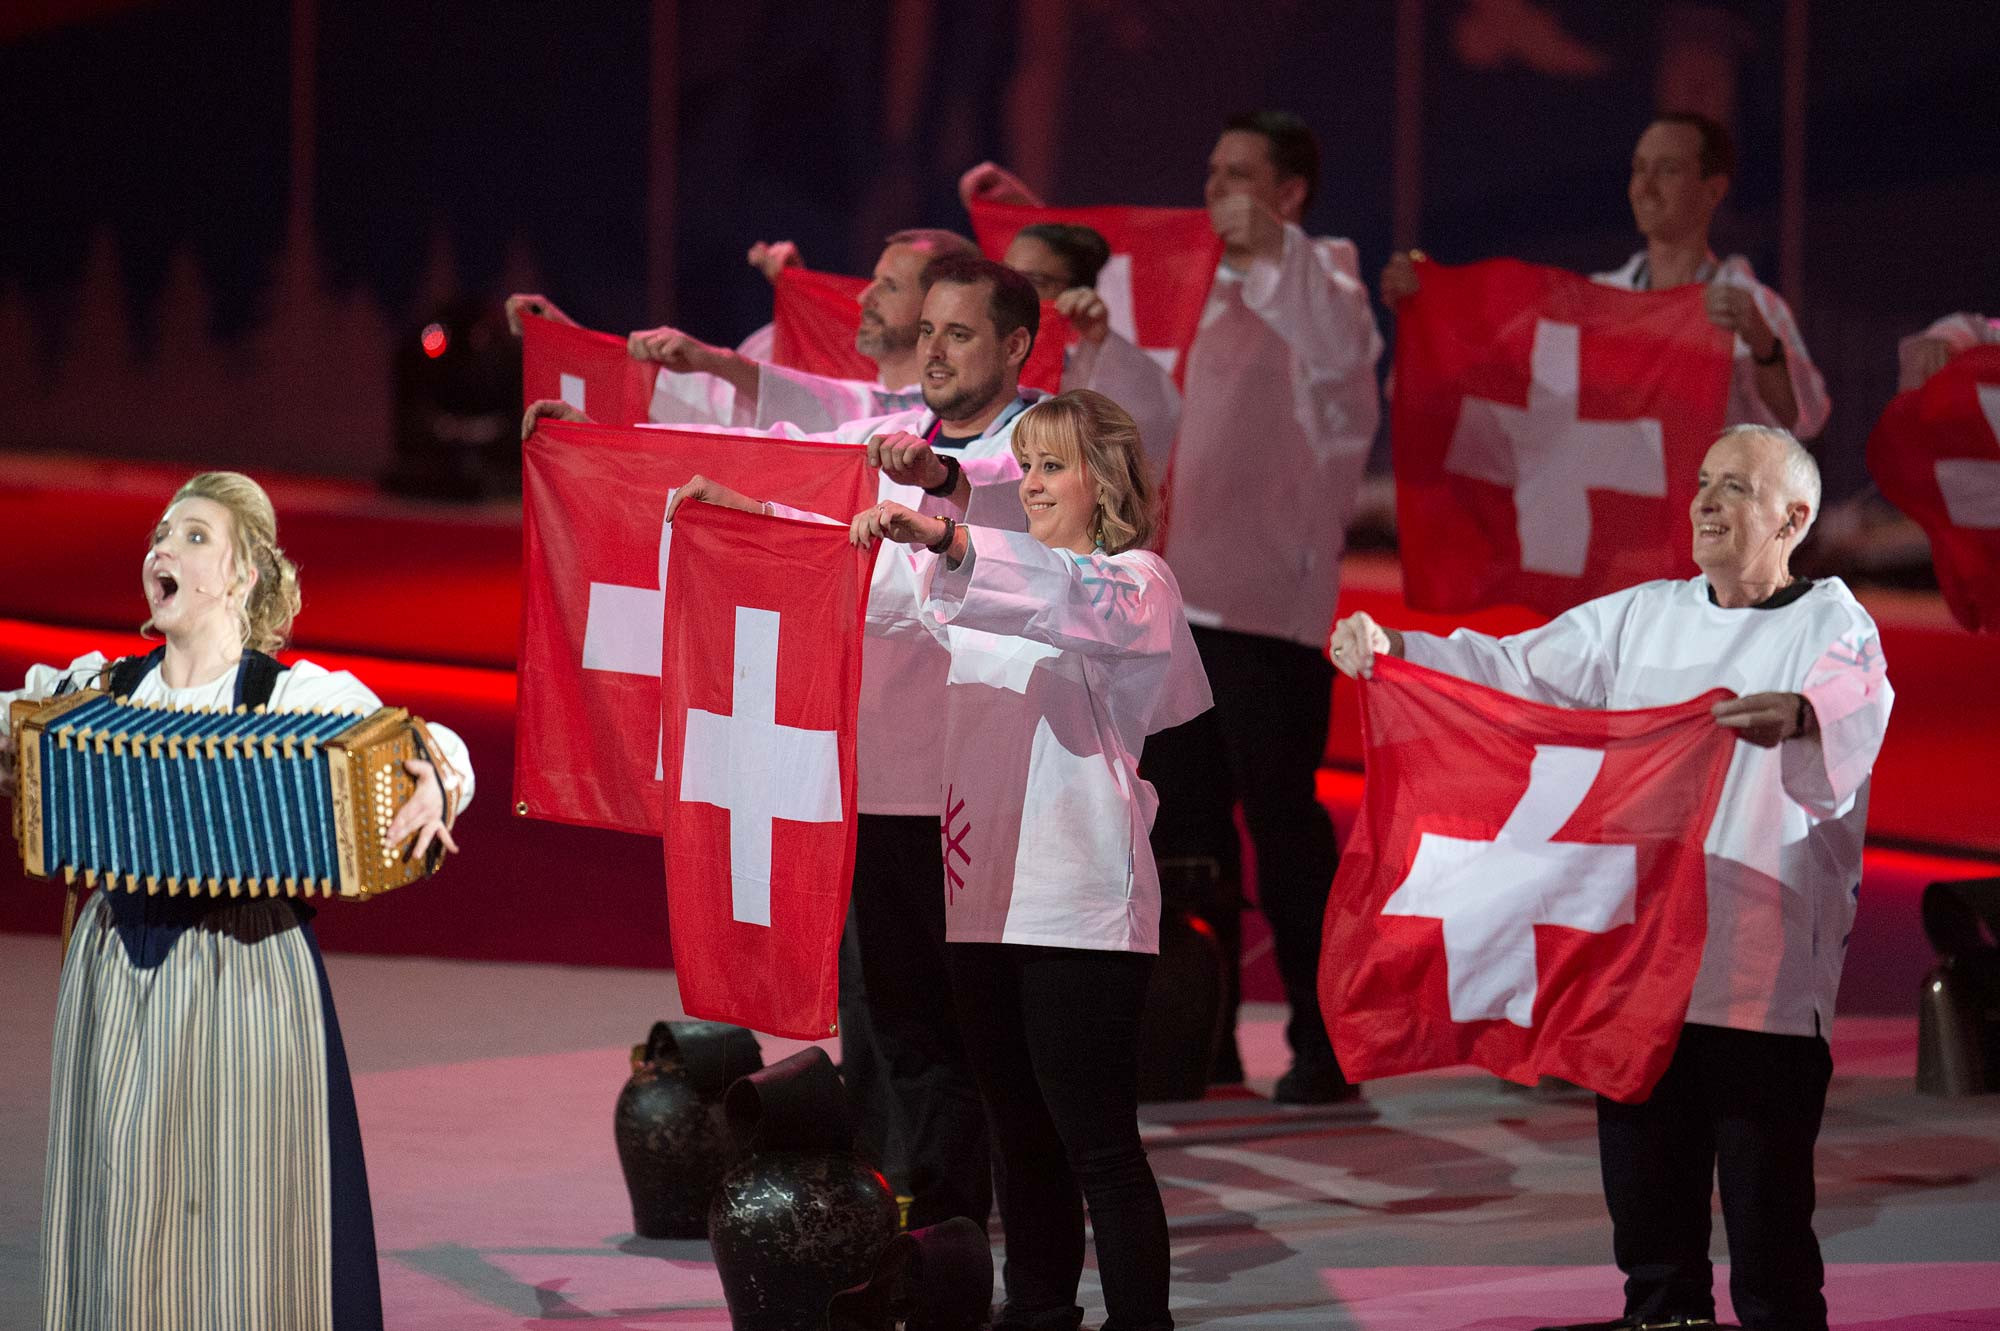 Lucerne is scheduled to host the 2021 Winter Universiade ©FISU